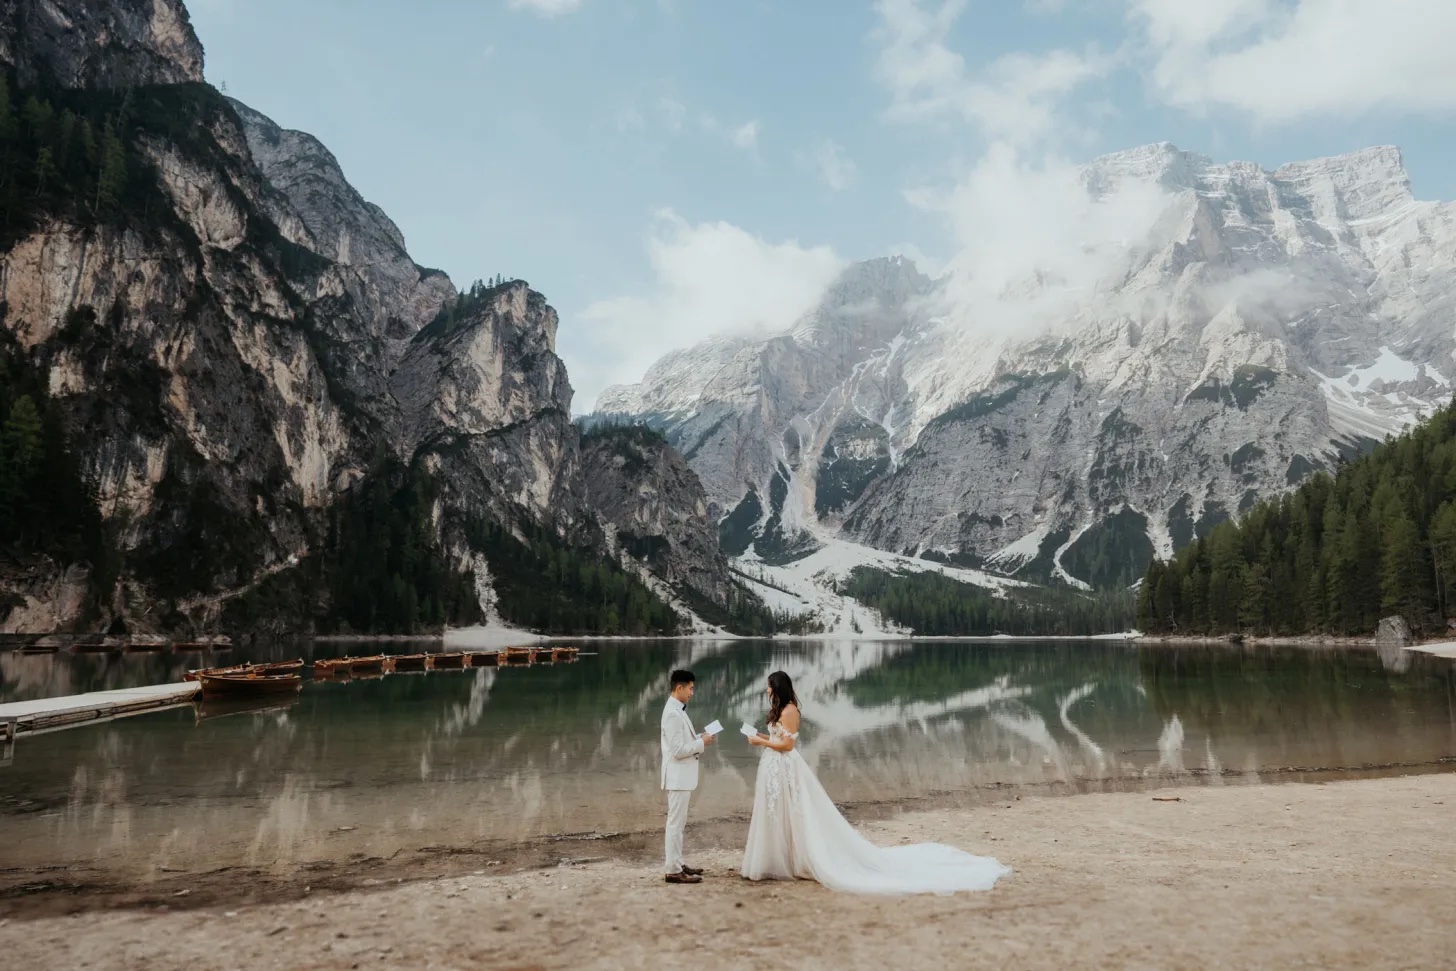 Couple reading vows with lake and snowy mountains behind them. 5 Rules when it comes to Planning a Wedding close to the Holidays